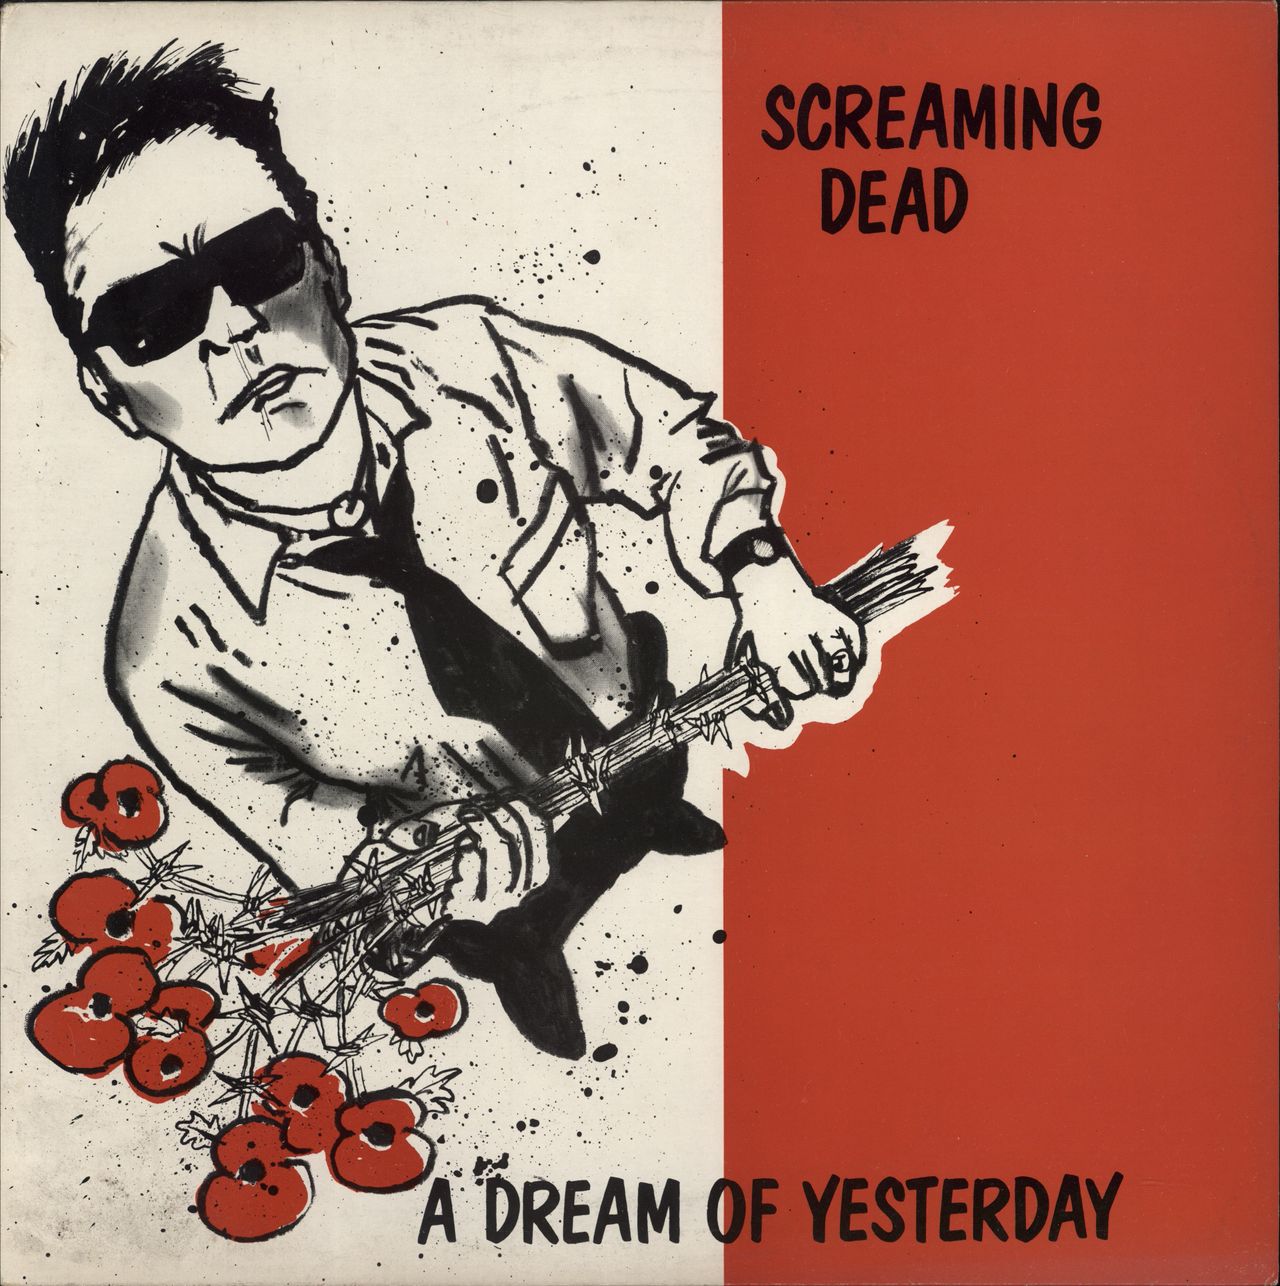 Screaming Dead A Dream Of Yesterday UK 12" vinyl single (12 inch record / Maxi-single) ANG.002